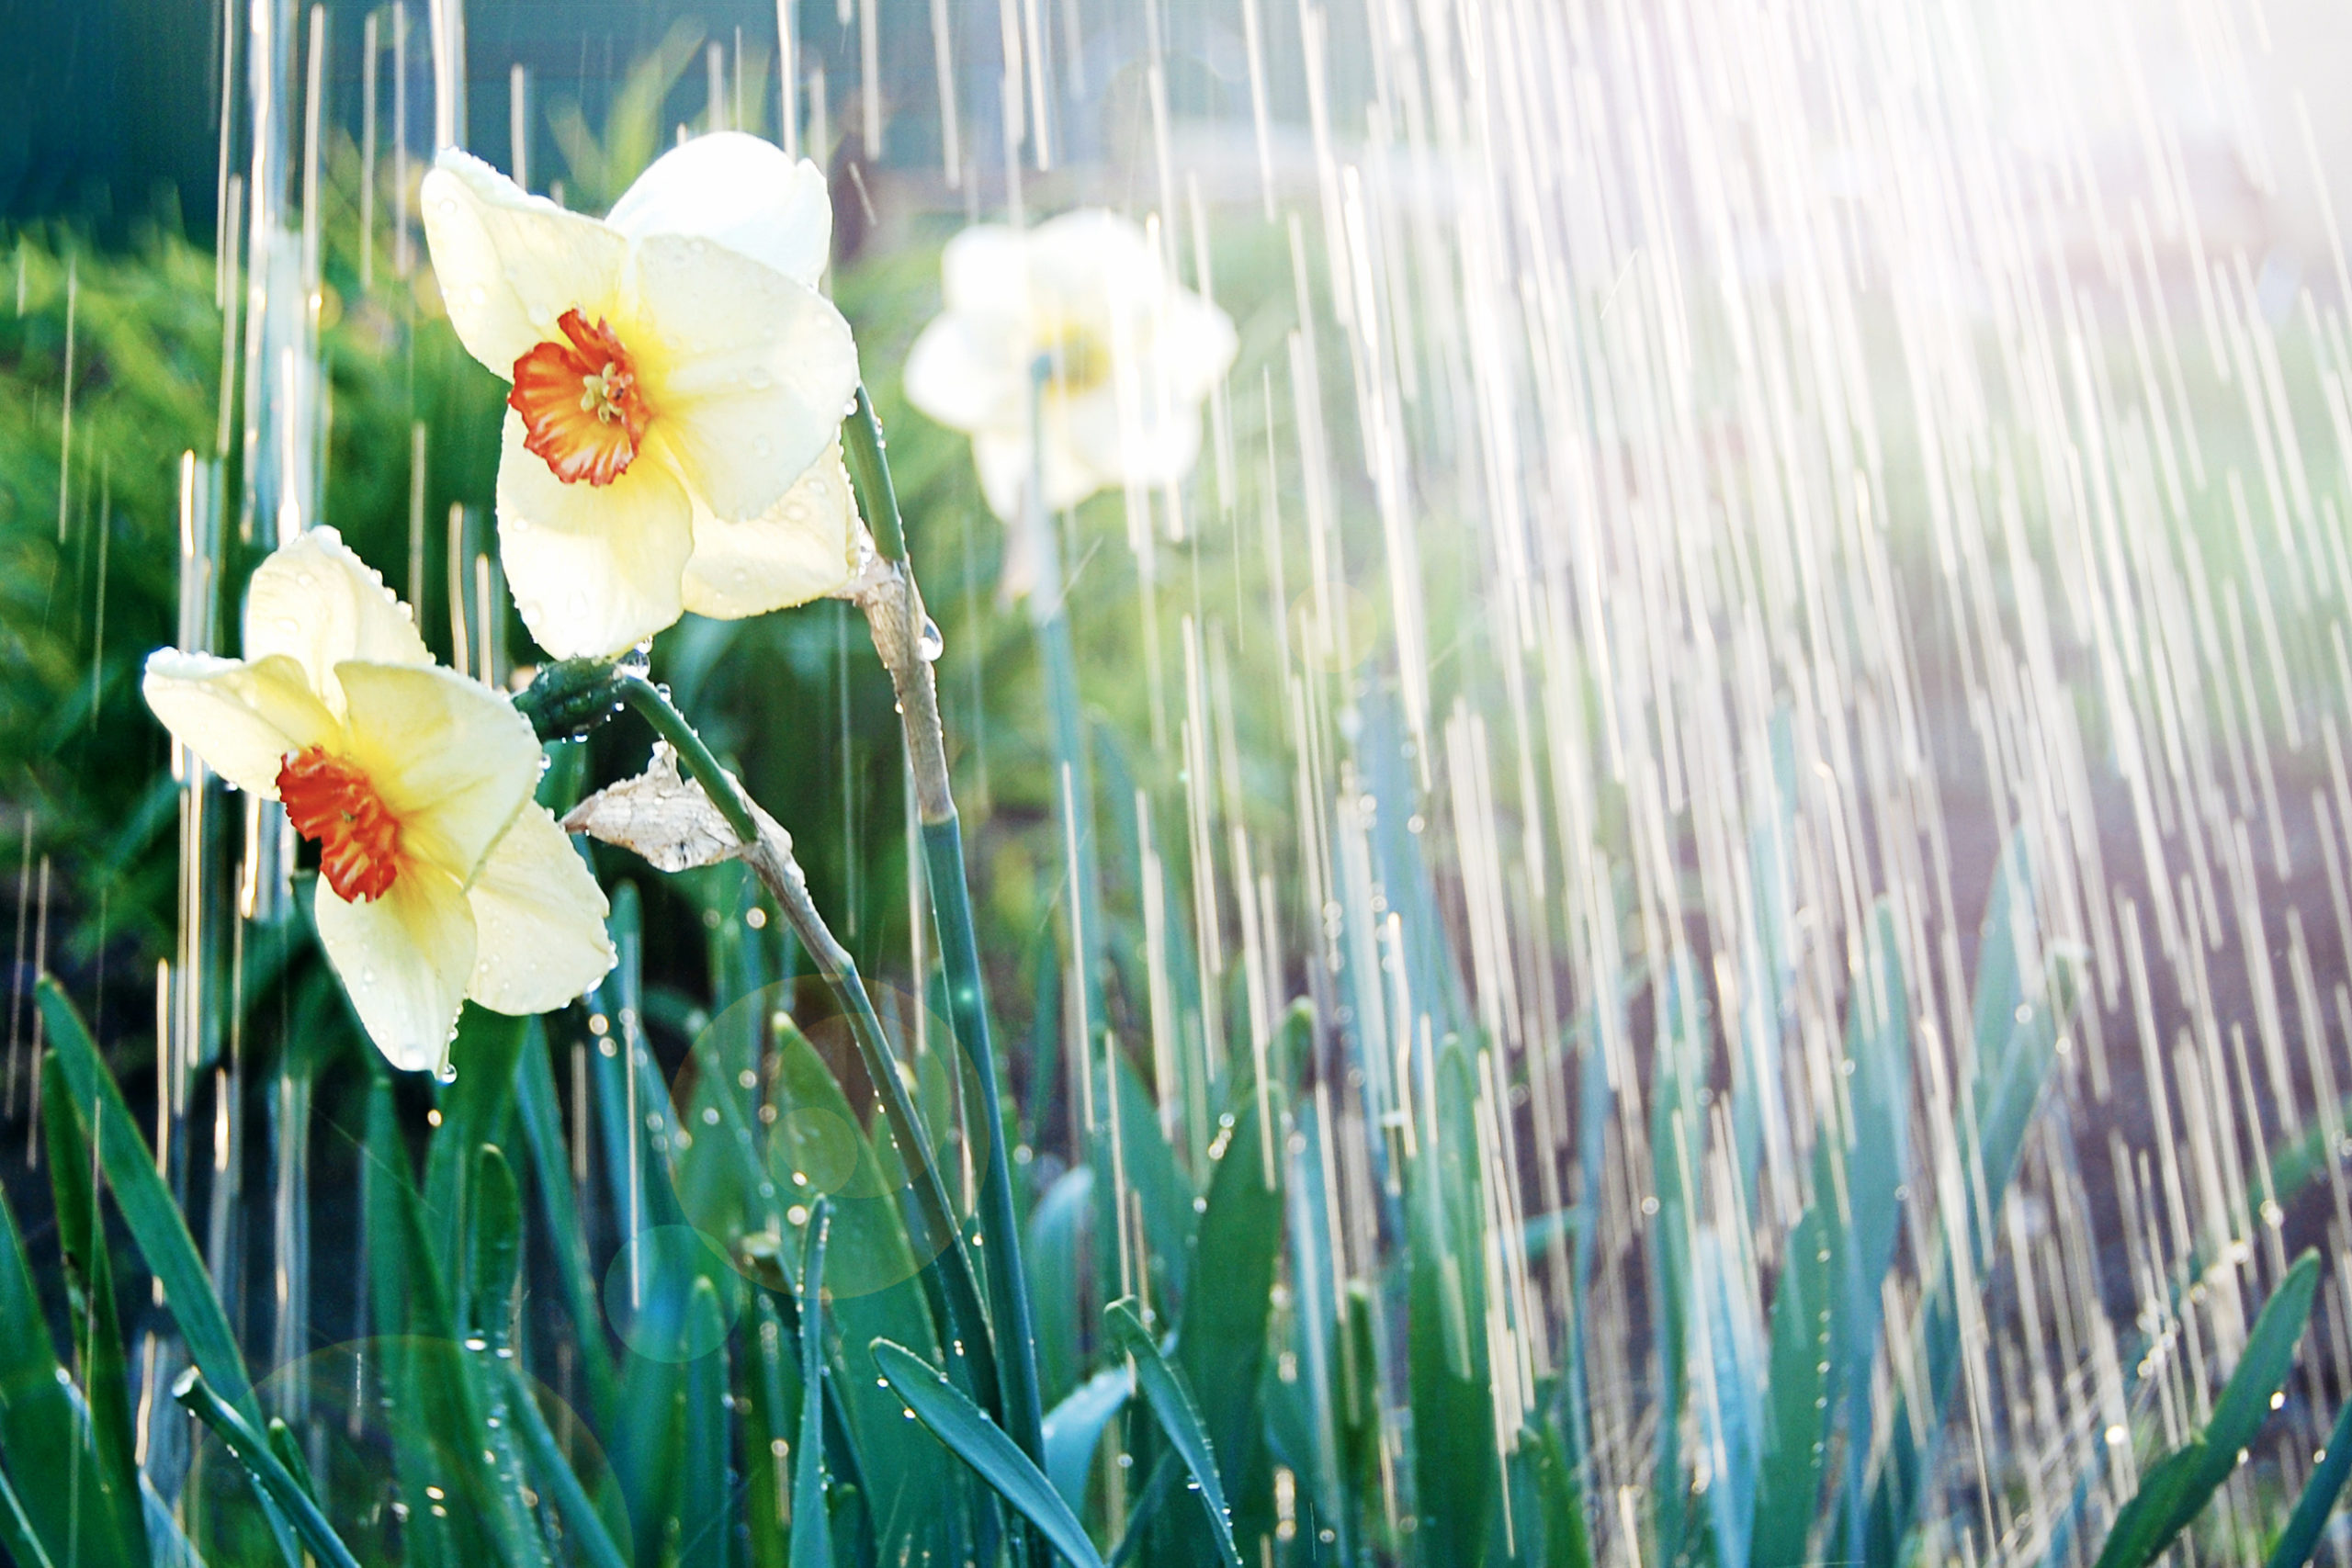 Watering white yellow daffodils, spring sunshine and waterdrops.